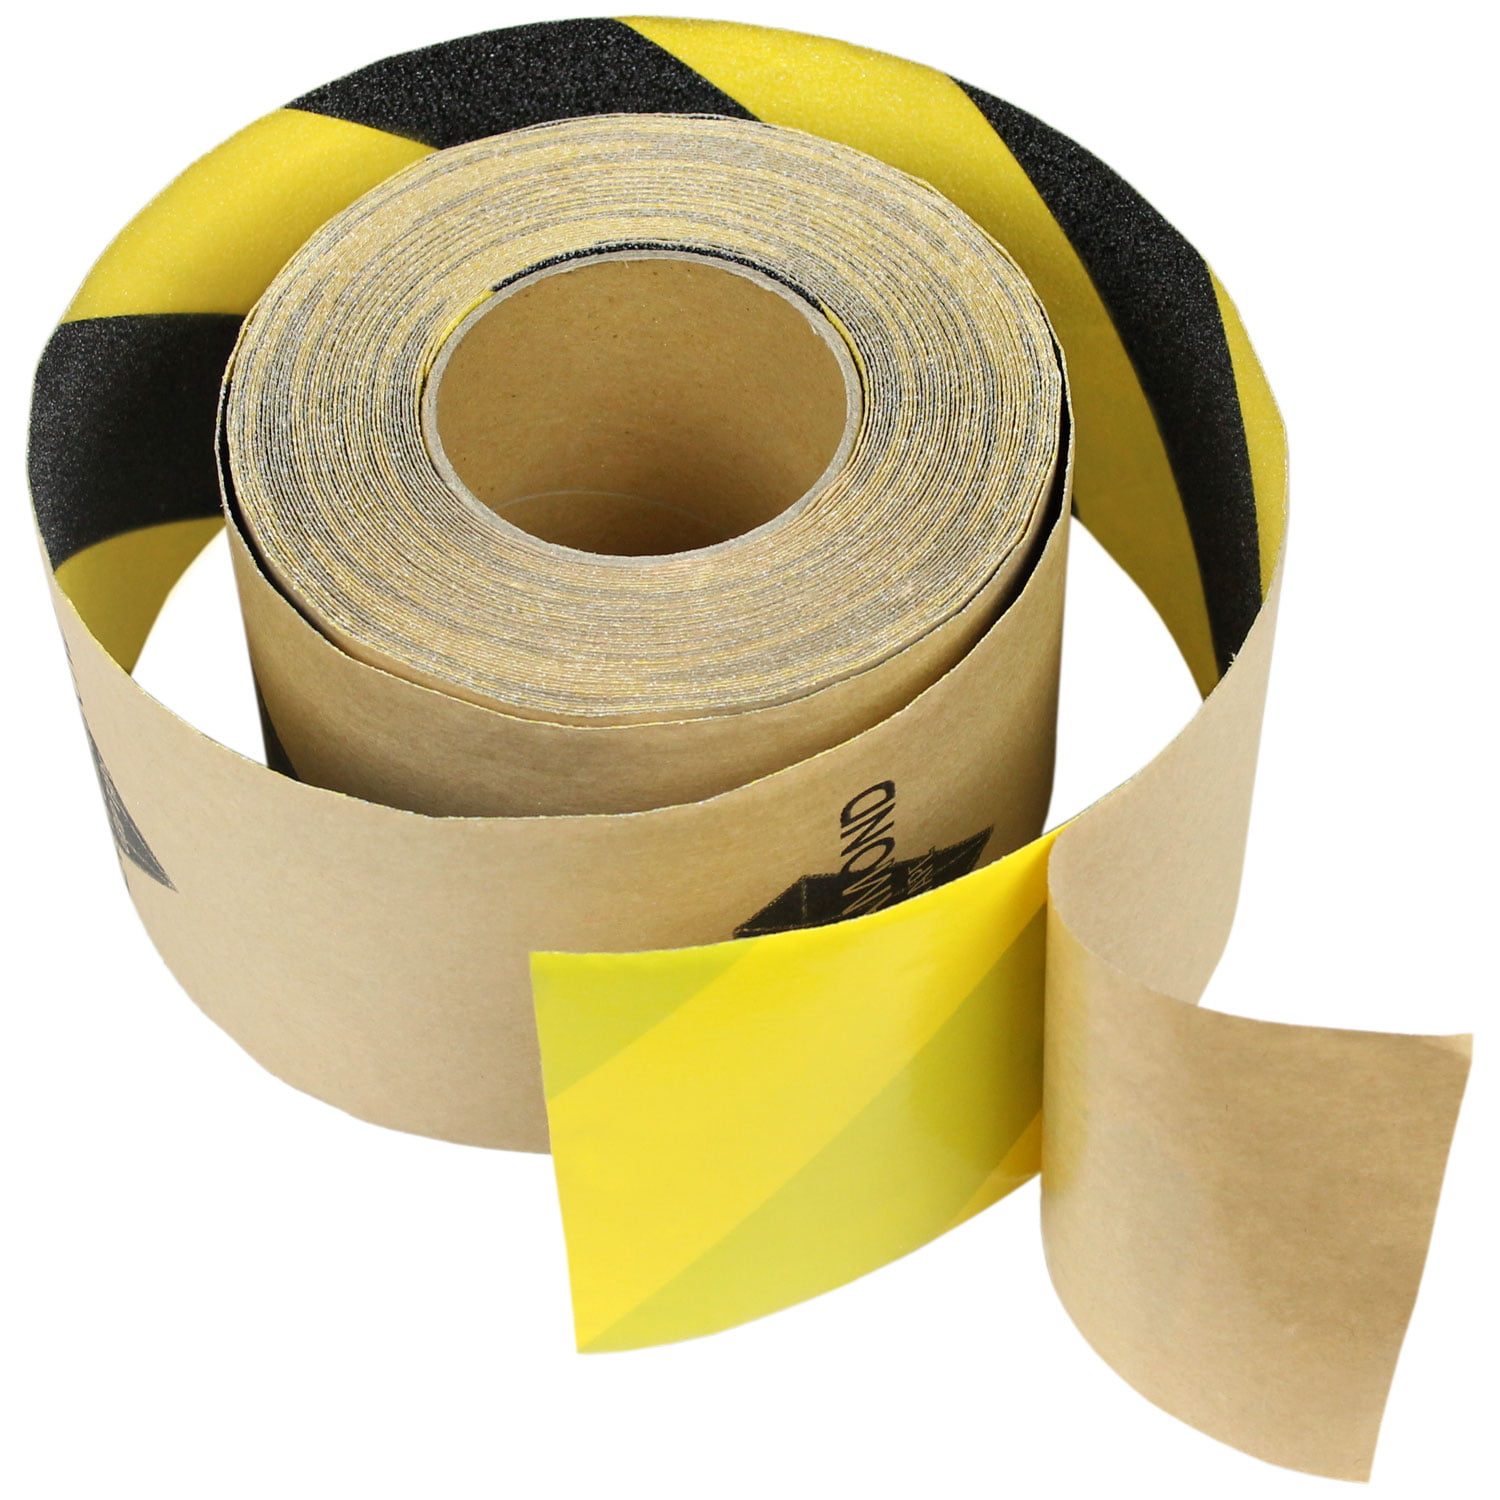 Safety Site Supplies 25mm x 1m Strip, Clear/Translucent Non-Slip Safety Strip Grip Tape ~ Adhesive Backed Floor Steps Construction Anti Slip Tape ~ High Grip 